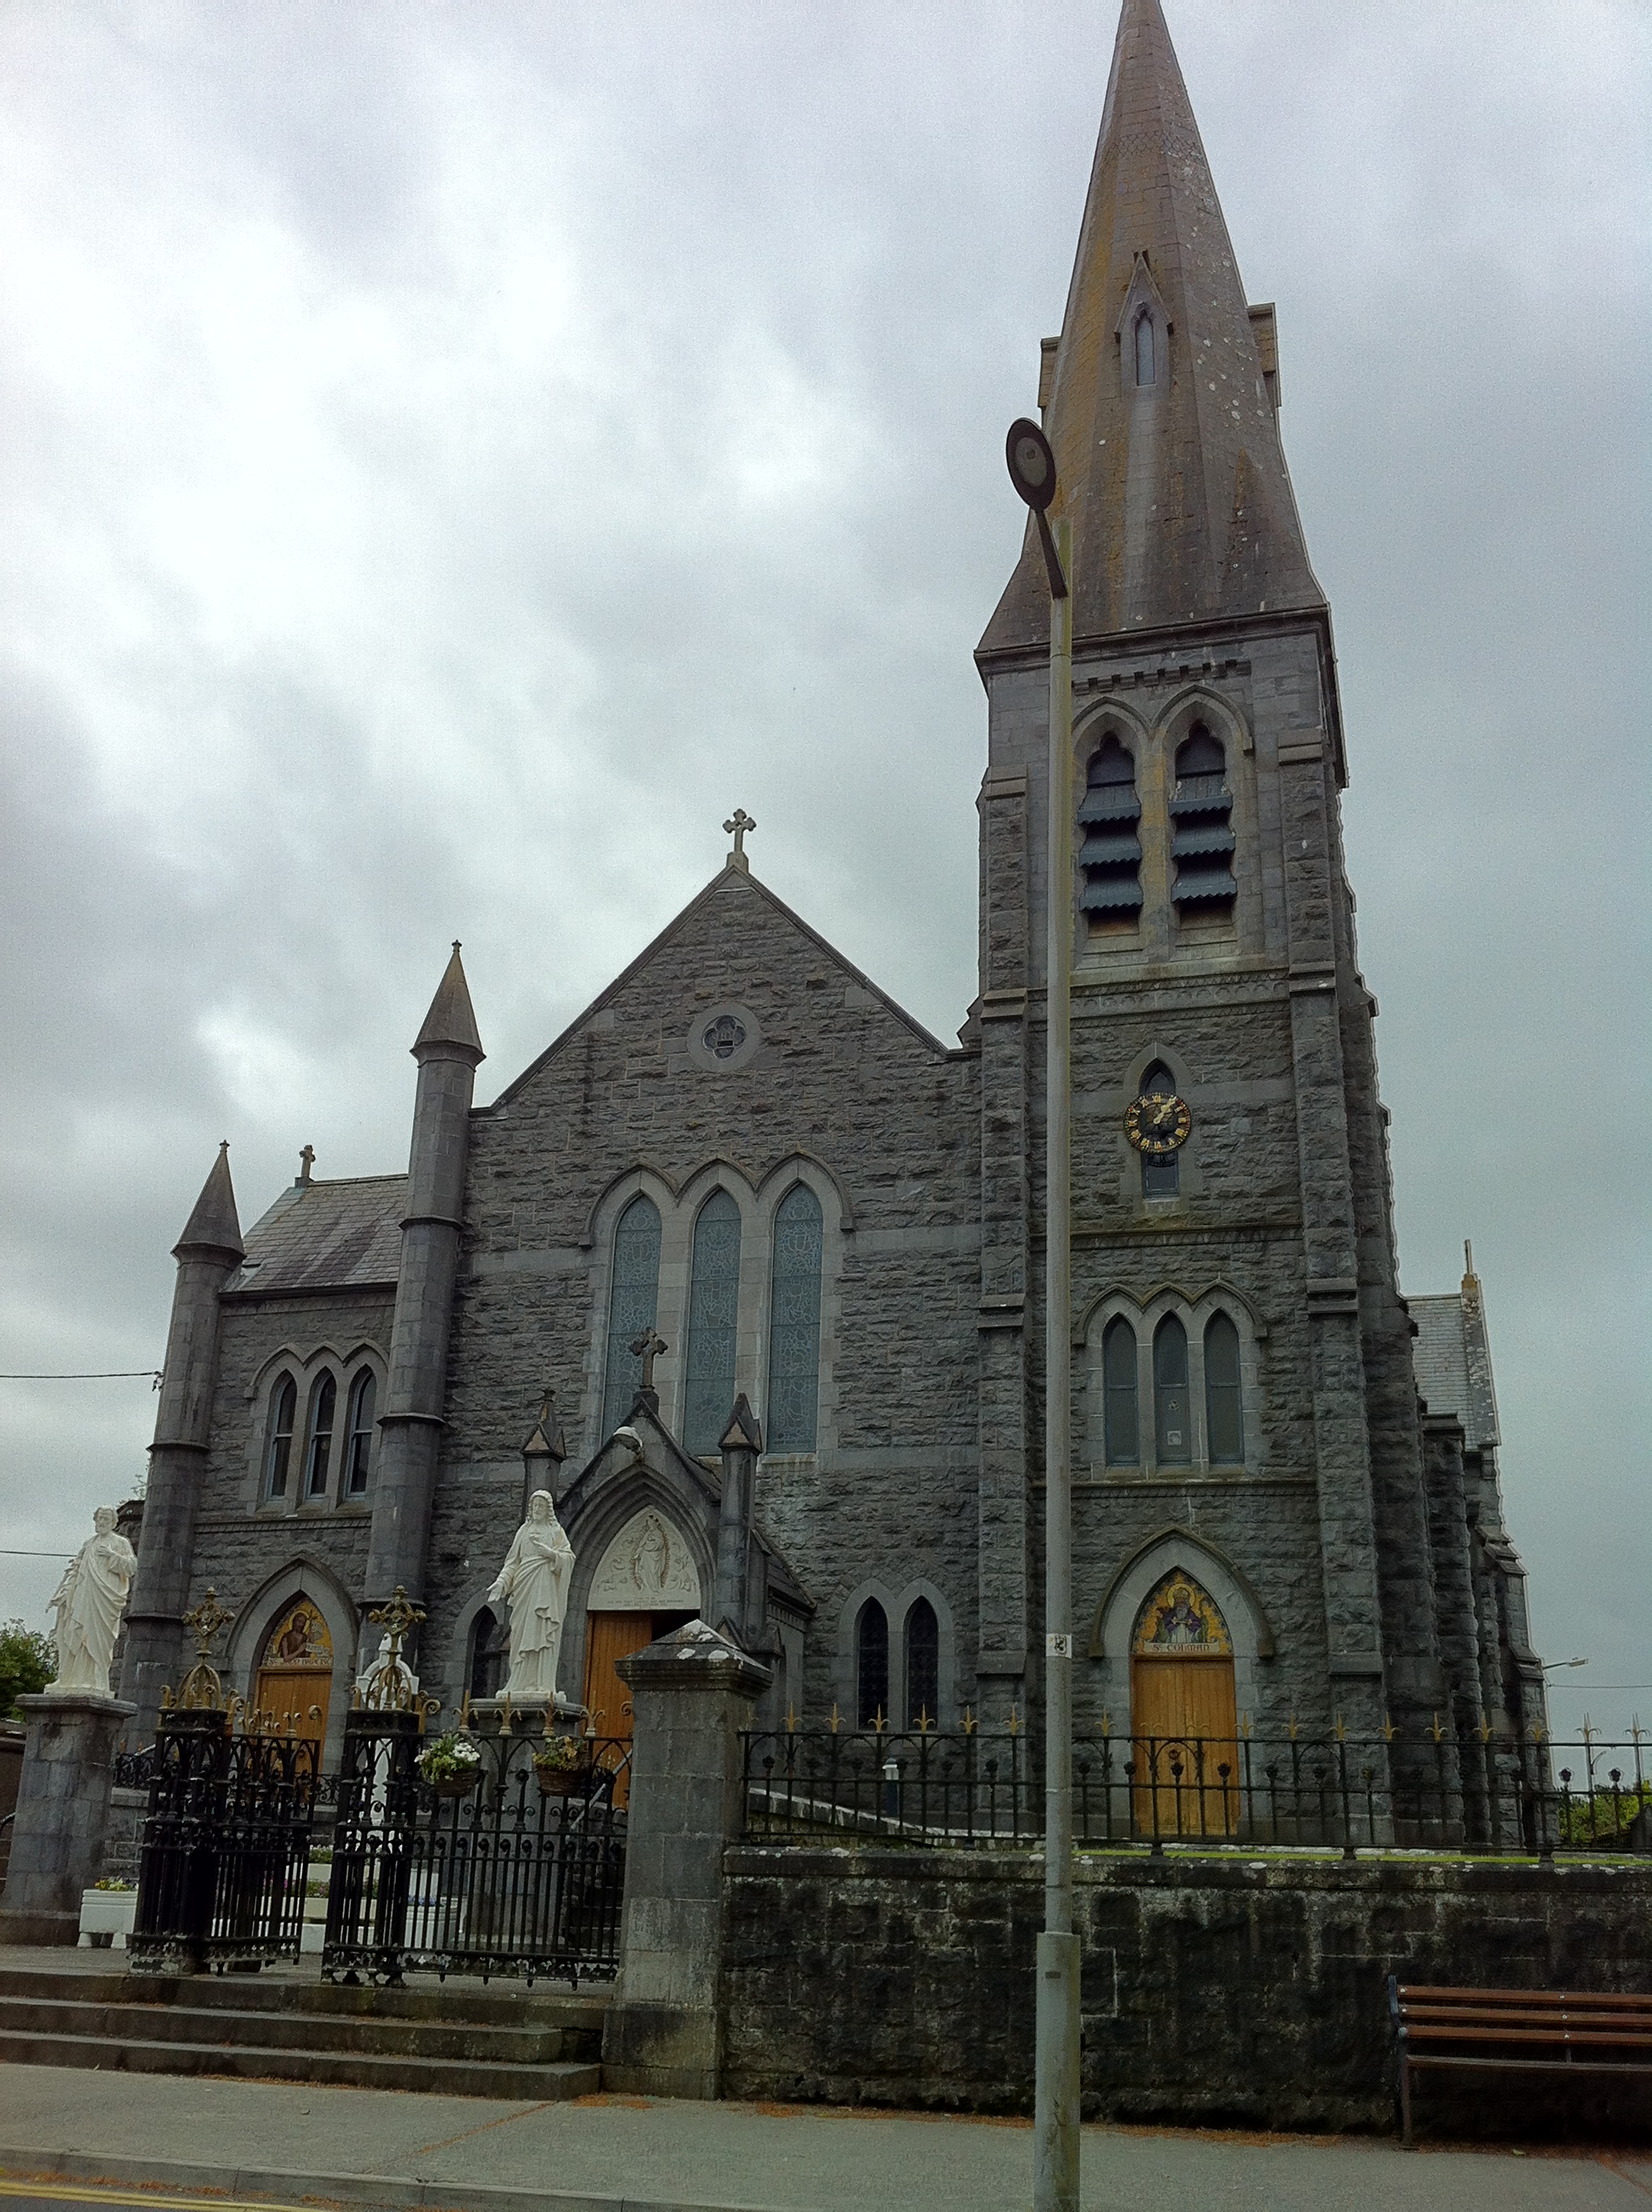 St. Colman's Catholic Church in Gort. John C. Swift was baptized in Gort in 1831. This is before records of baptisms were maintained, but 1864 John's wife wrote the priest in Gort to ask for a record of John's birth, and the priest sent a statement based on testimony by credible witnesses. Photo by Annis Householder.